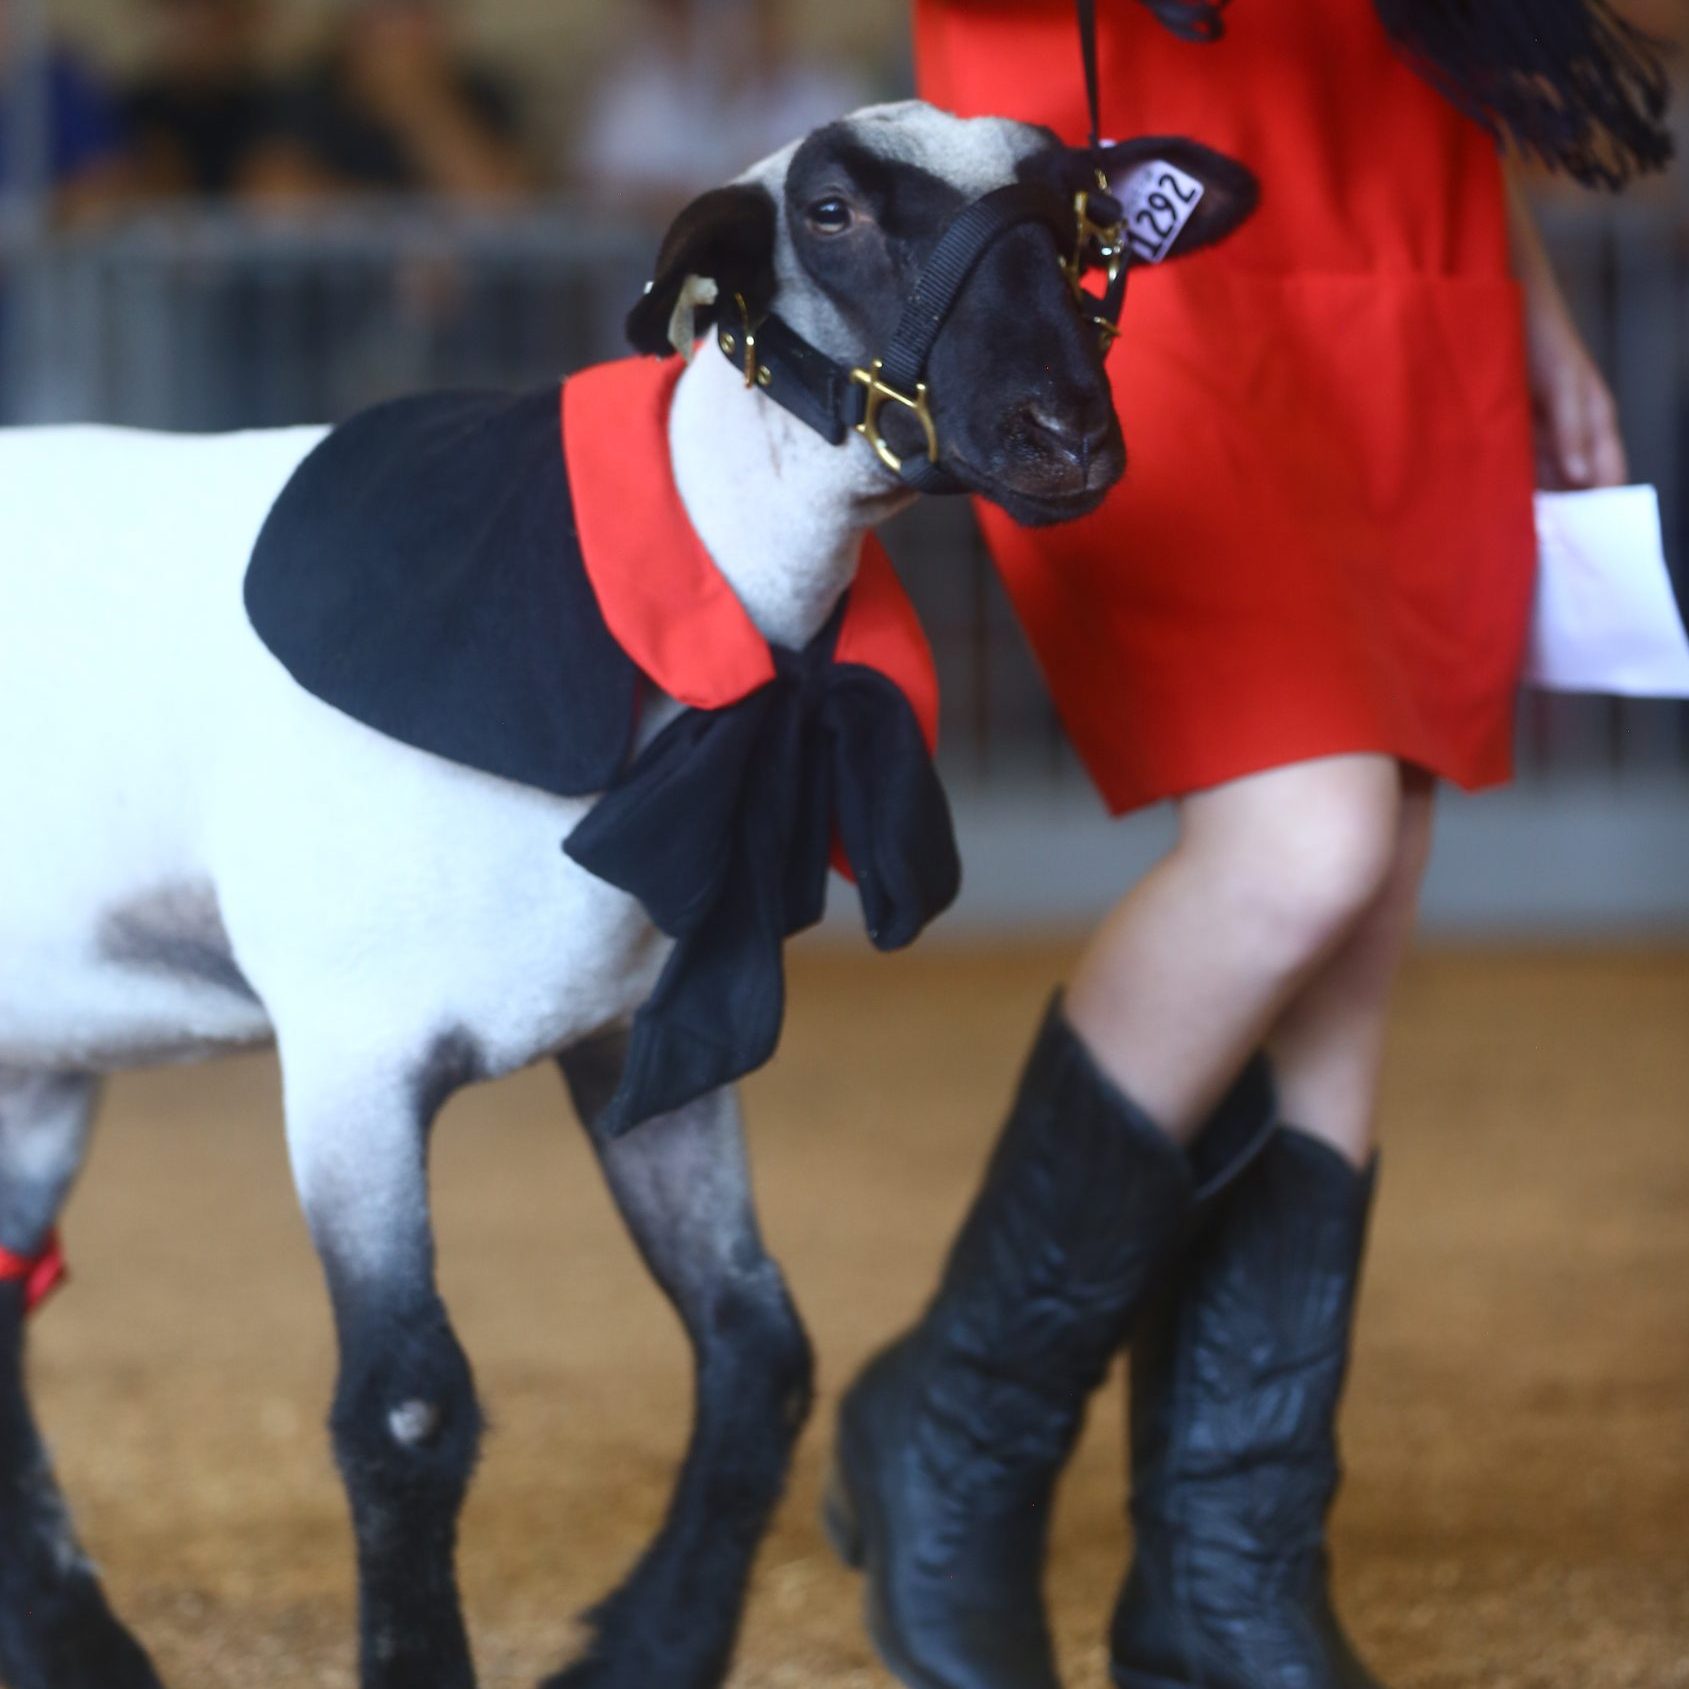 Lamb dressed up with person